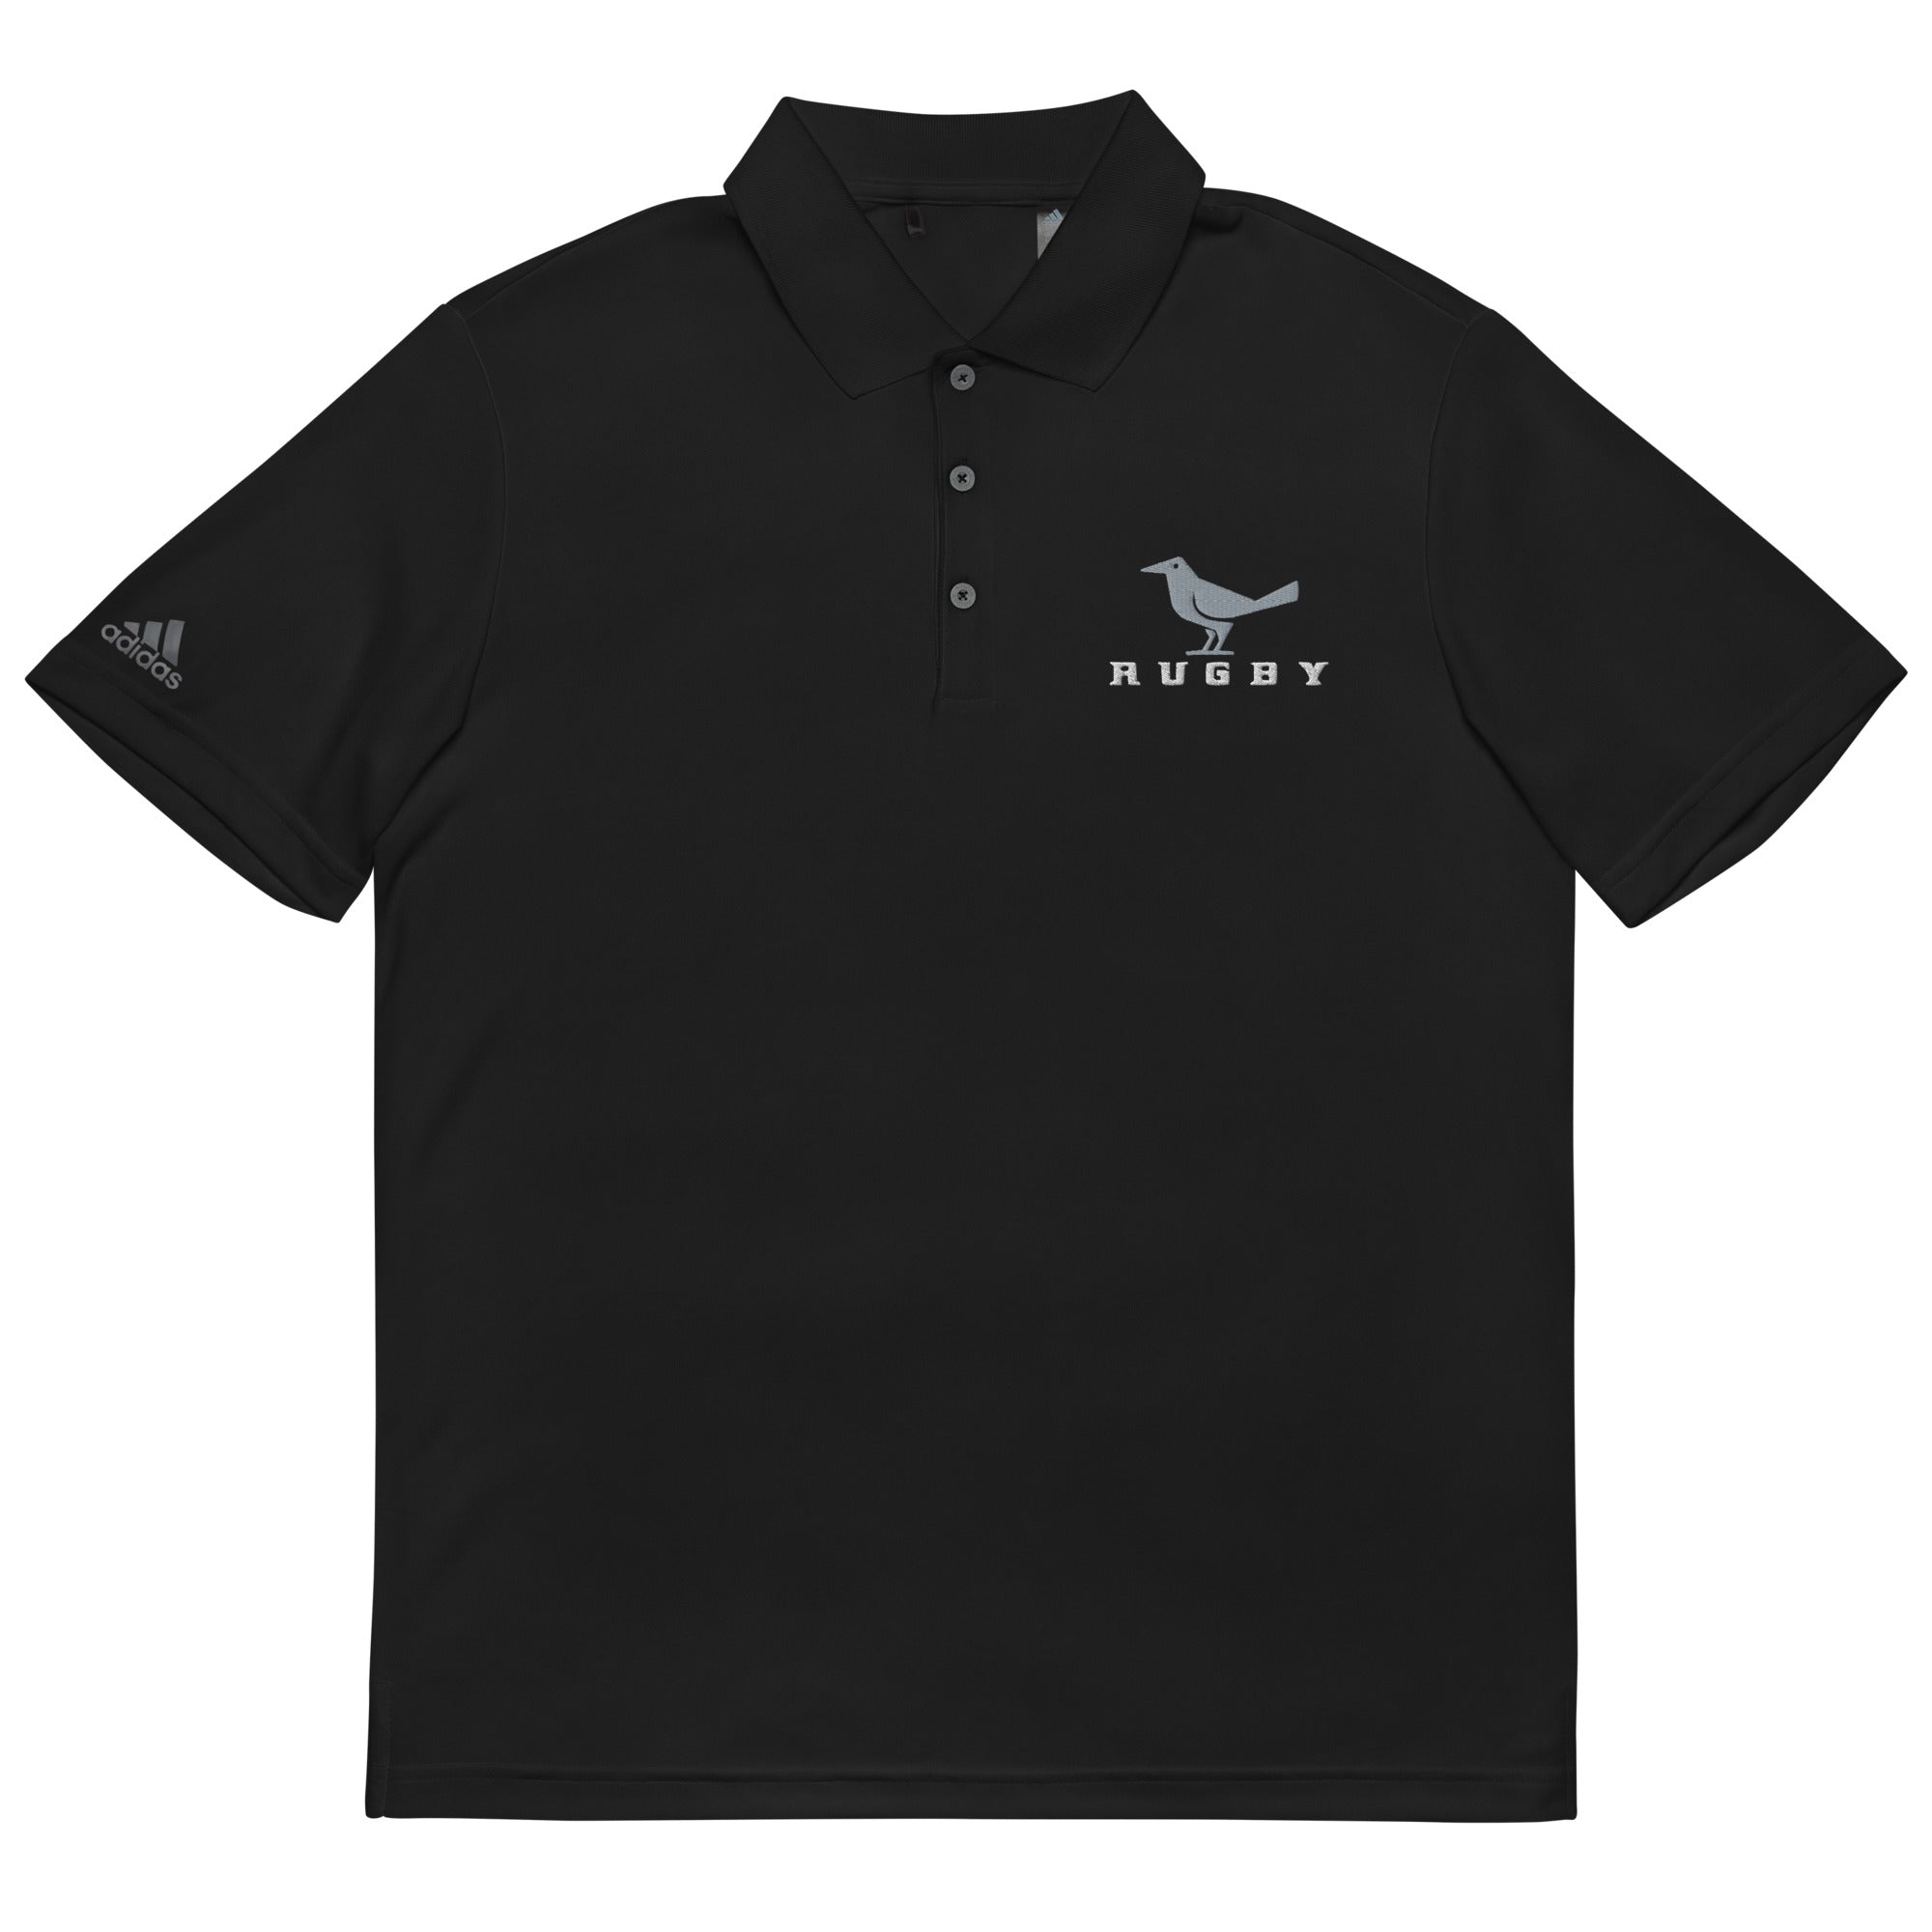 Adidas - Coaches Performance Polo - East County Grackles